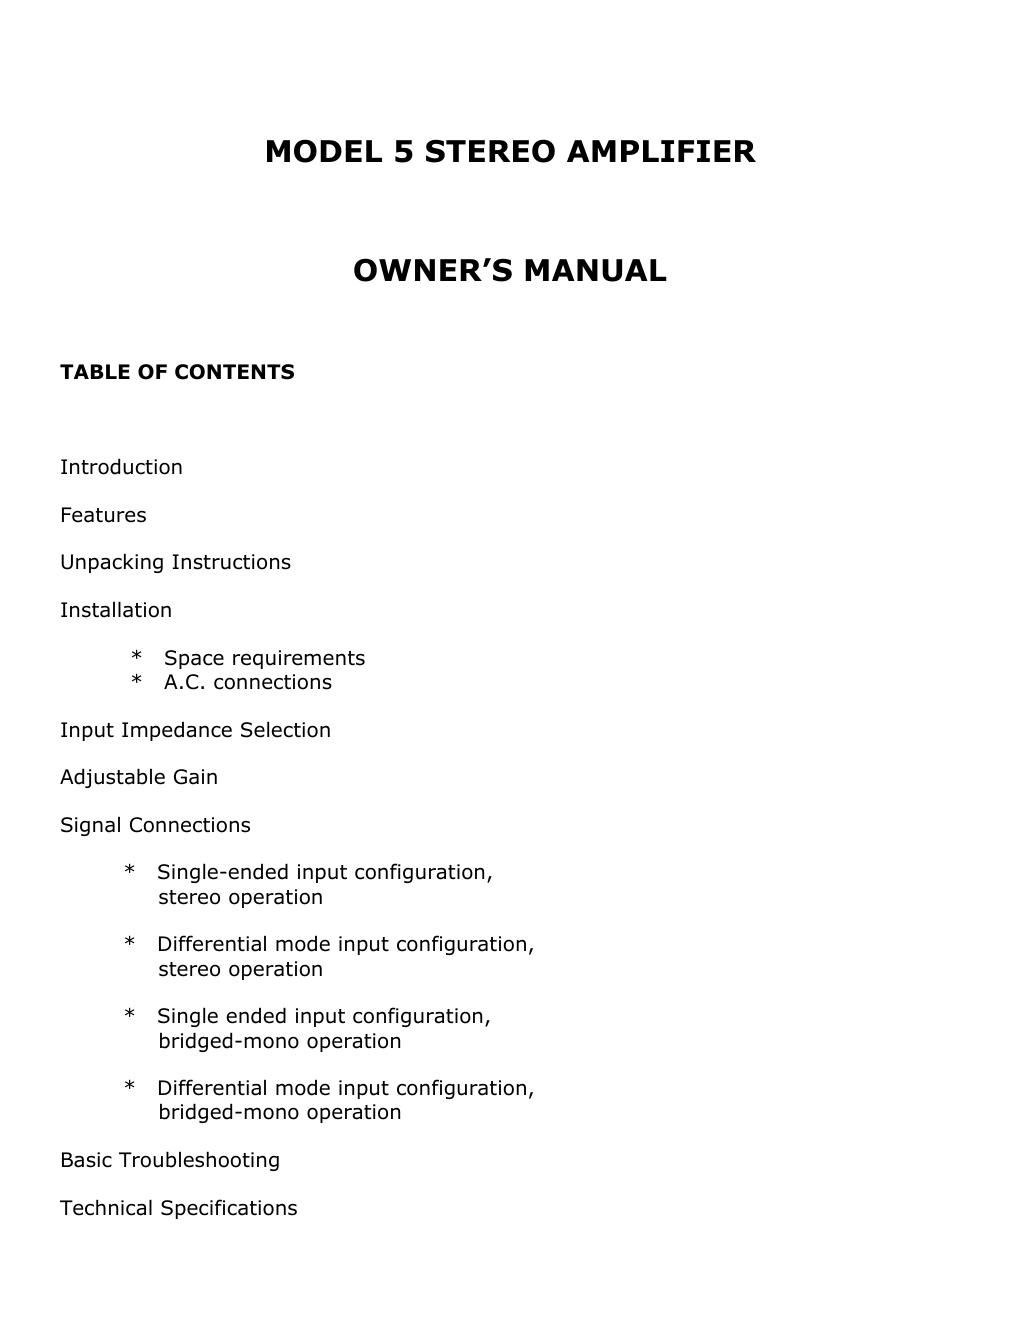 jeff rowland m 5 owners manual